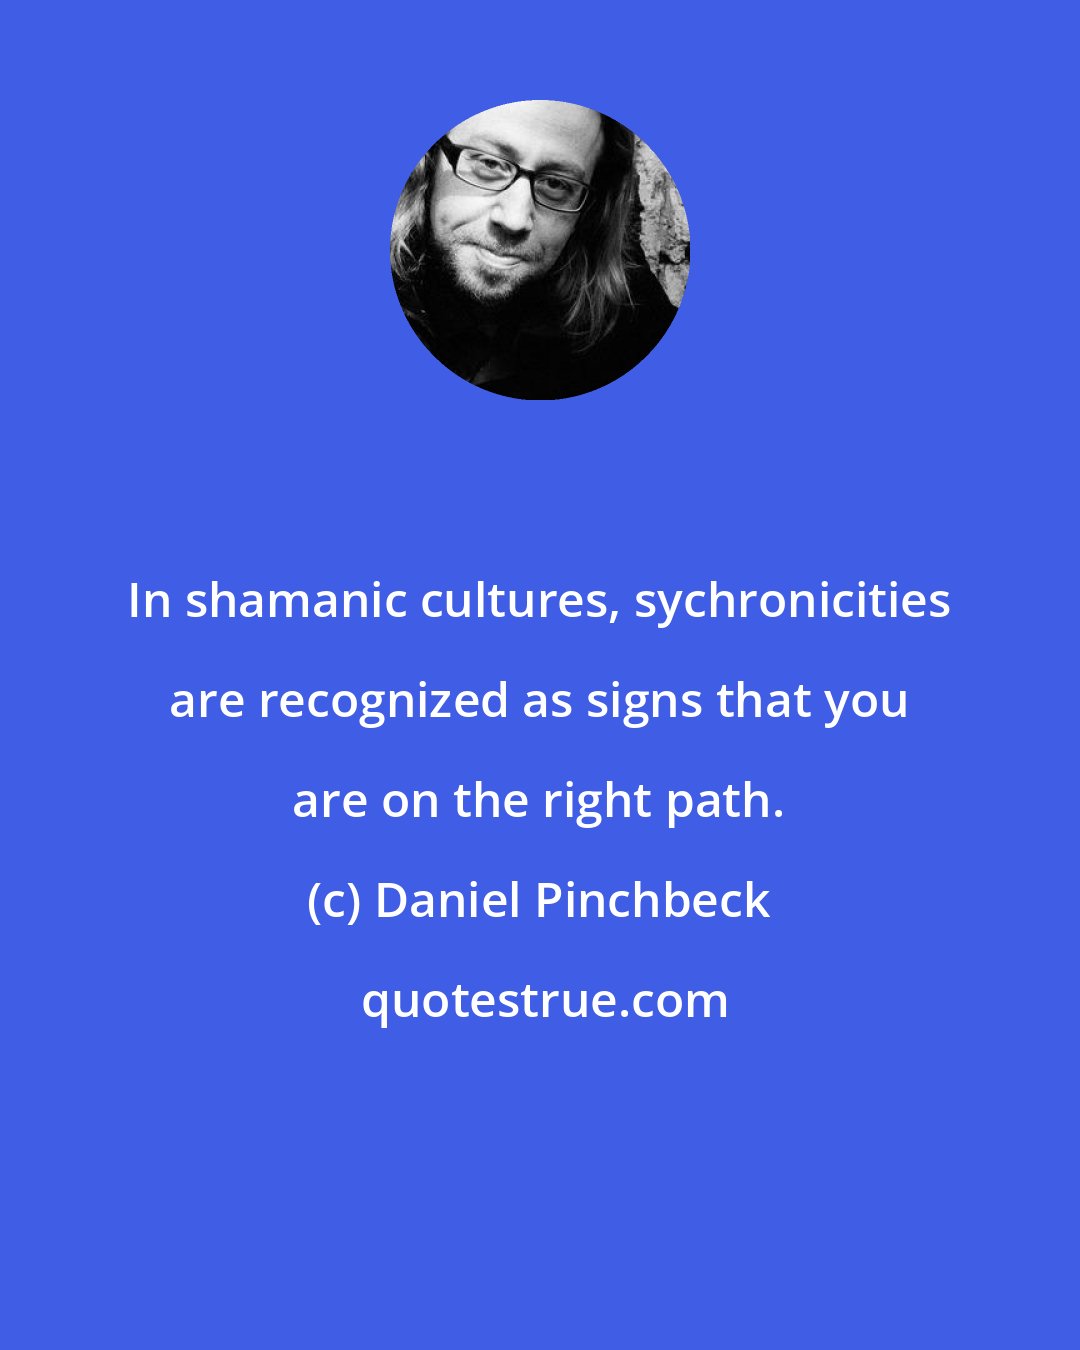 Daniel Pinchbeck: In shamanic cultures, sychronicities are recognized as signs that you are on the right path.